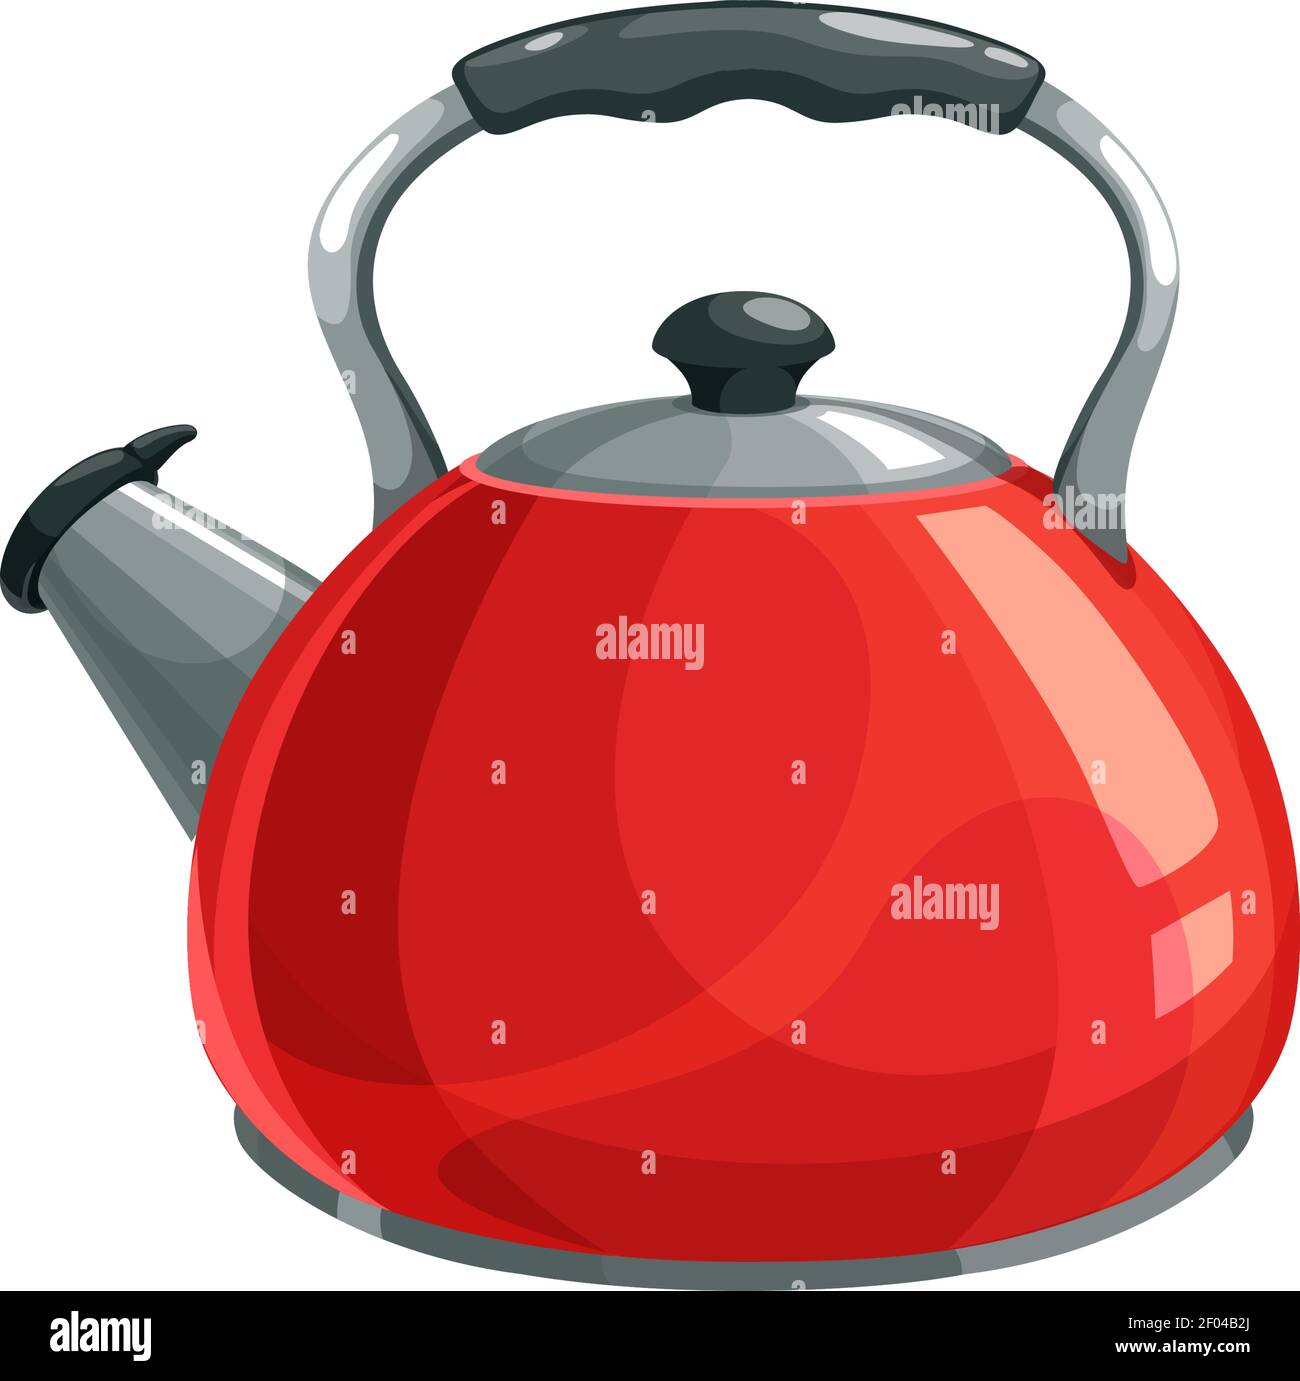 https://c8.alamy.com/comp/2F04B2J/stovetop-whistling-kettle-isolated-kitchenware-vector-red-aluminum-tea-pot-stove-top-water-boiling-object-tea-and-coffee-glossy-container-metal-te-2F04B2J.jpg